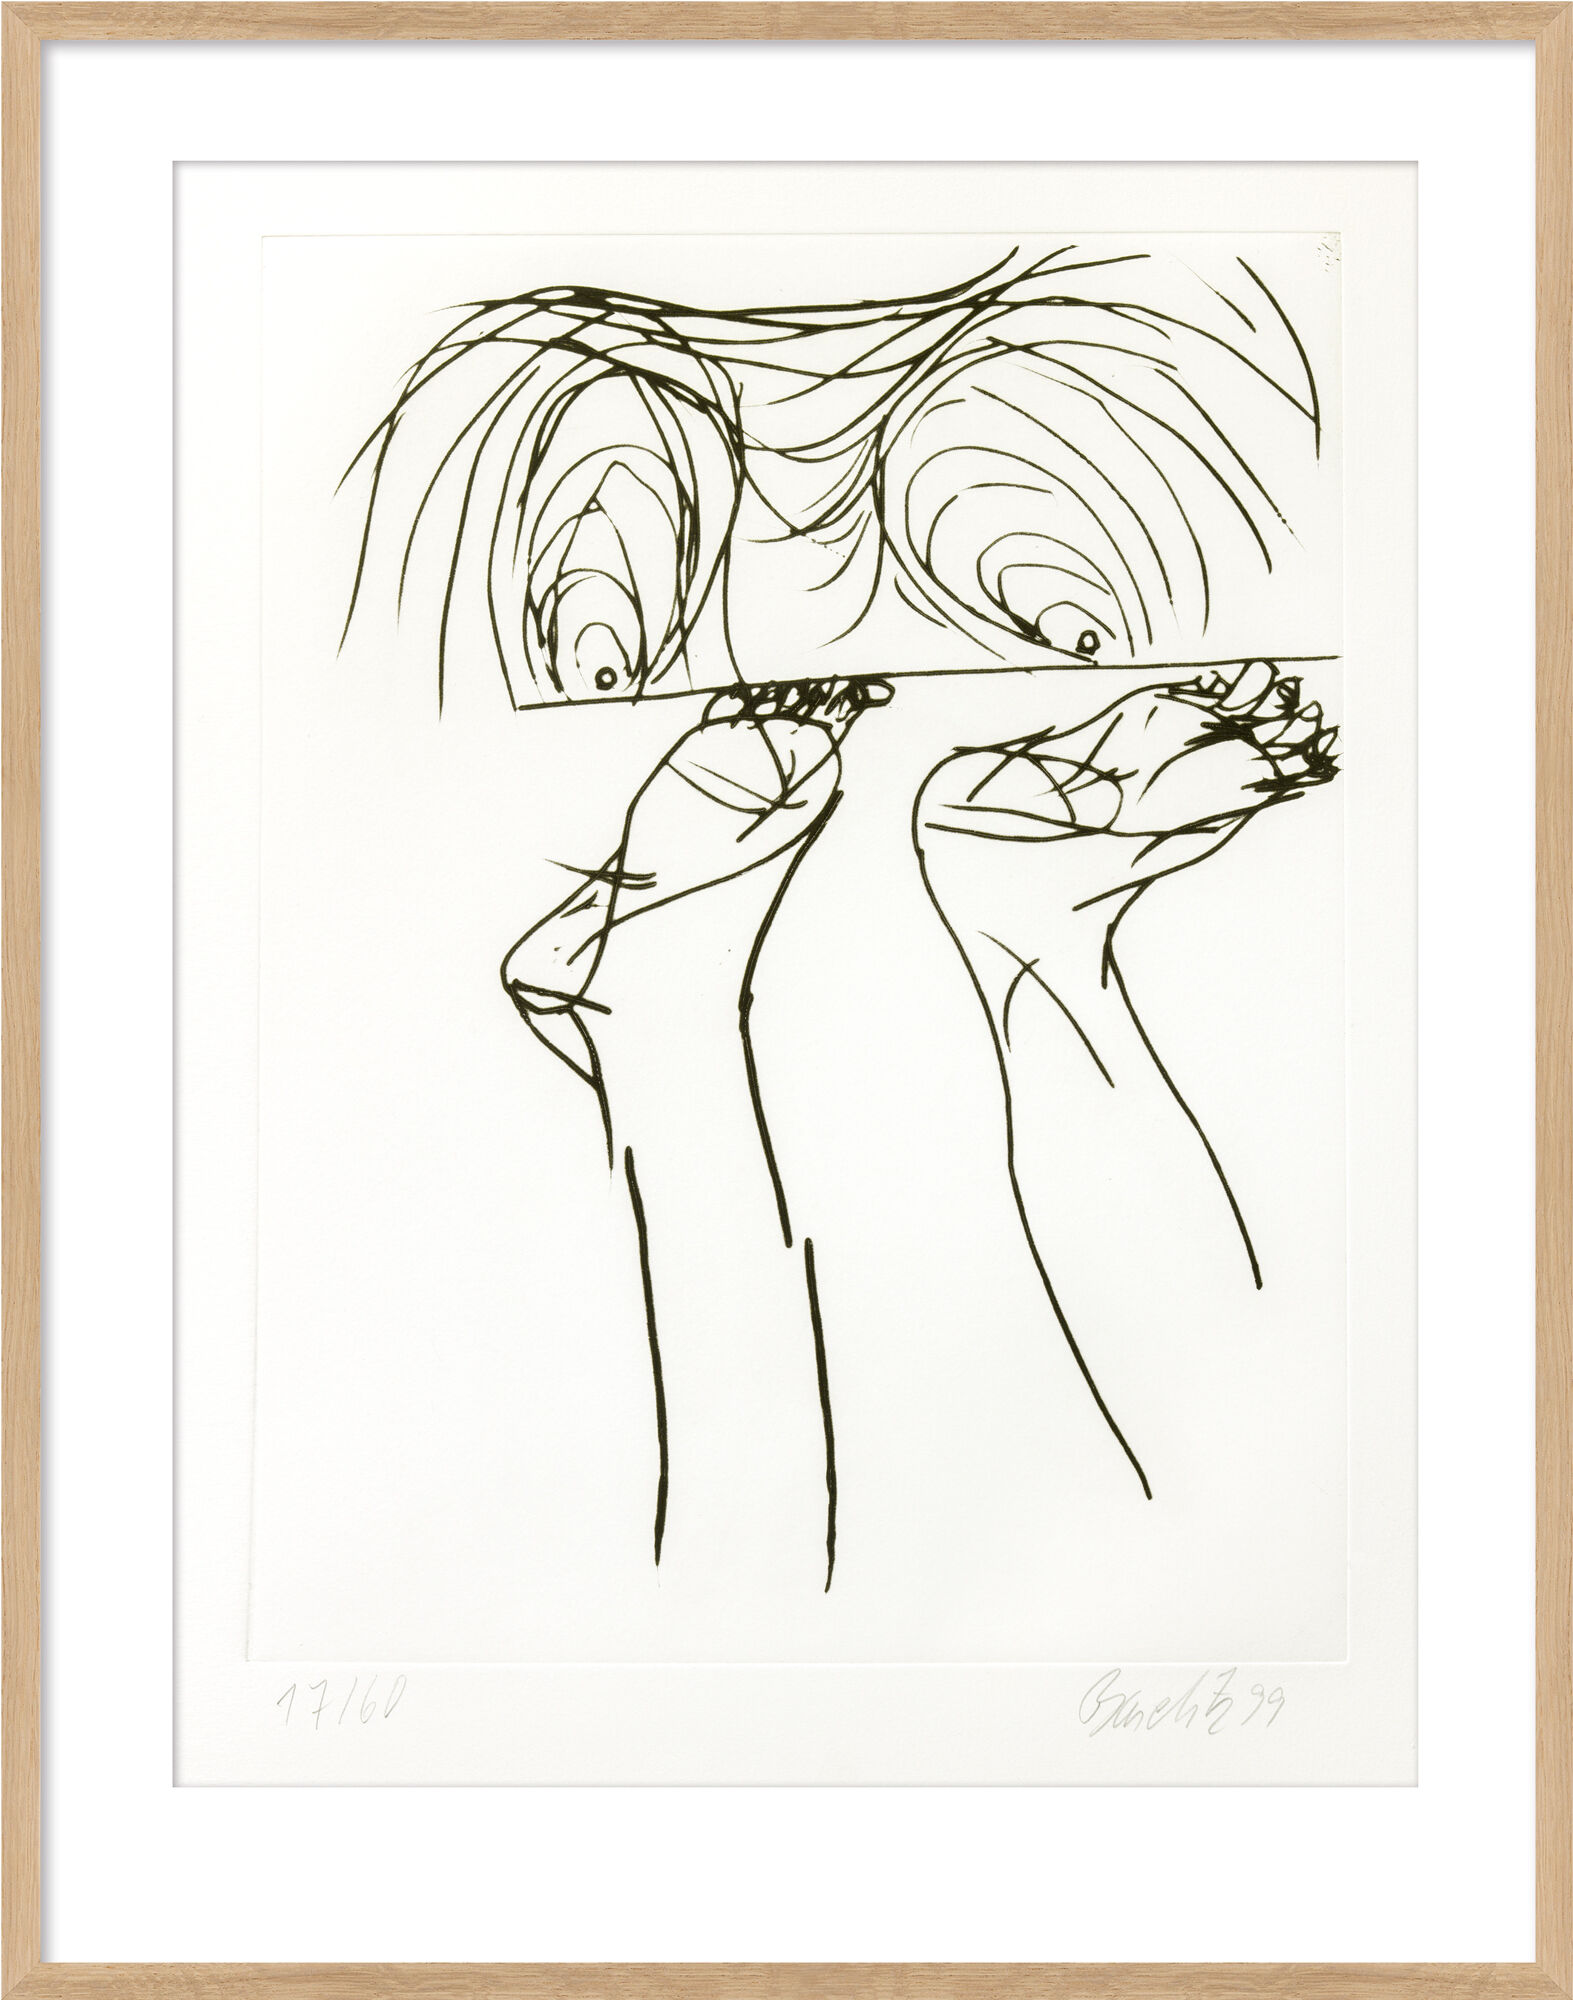 Picture "Untitled VI." from the portfolio "Signs" (1999/2000) by Georg Baselitz